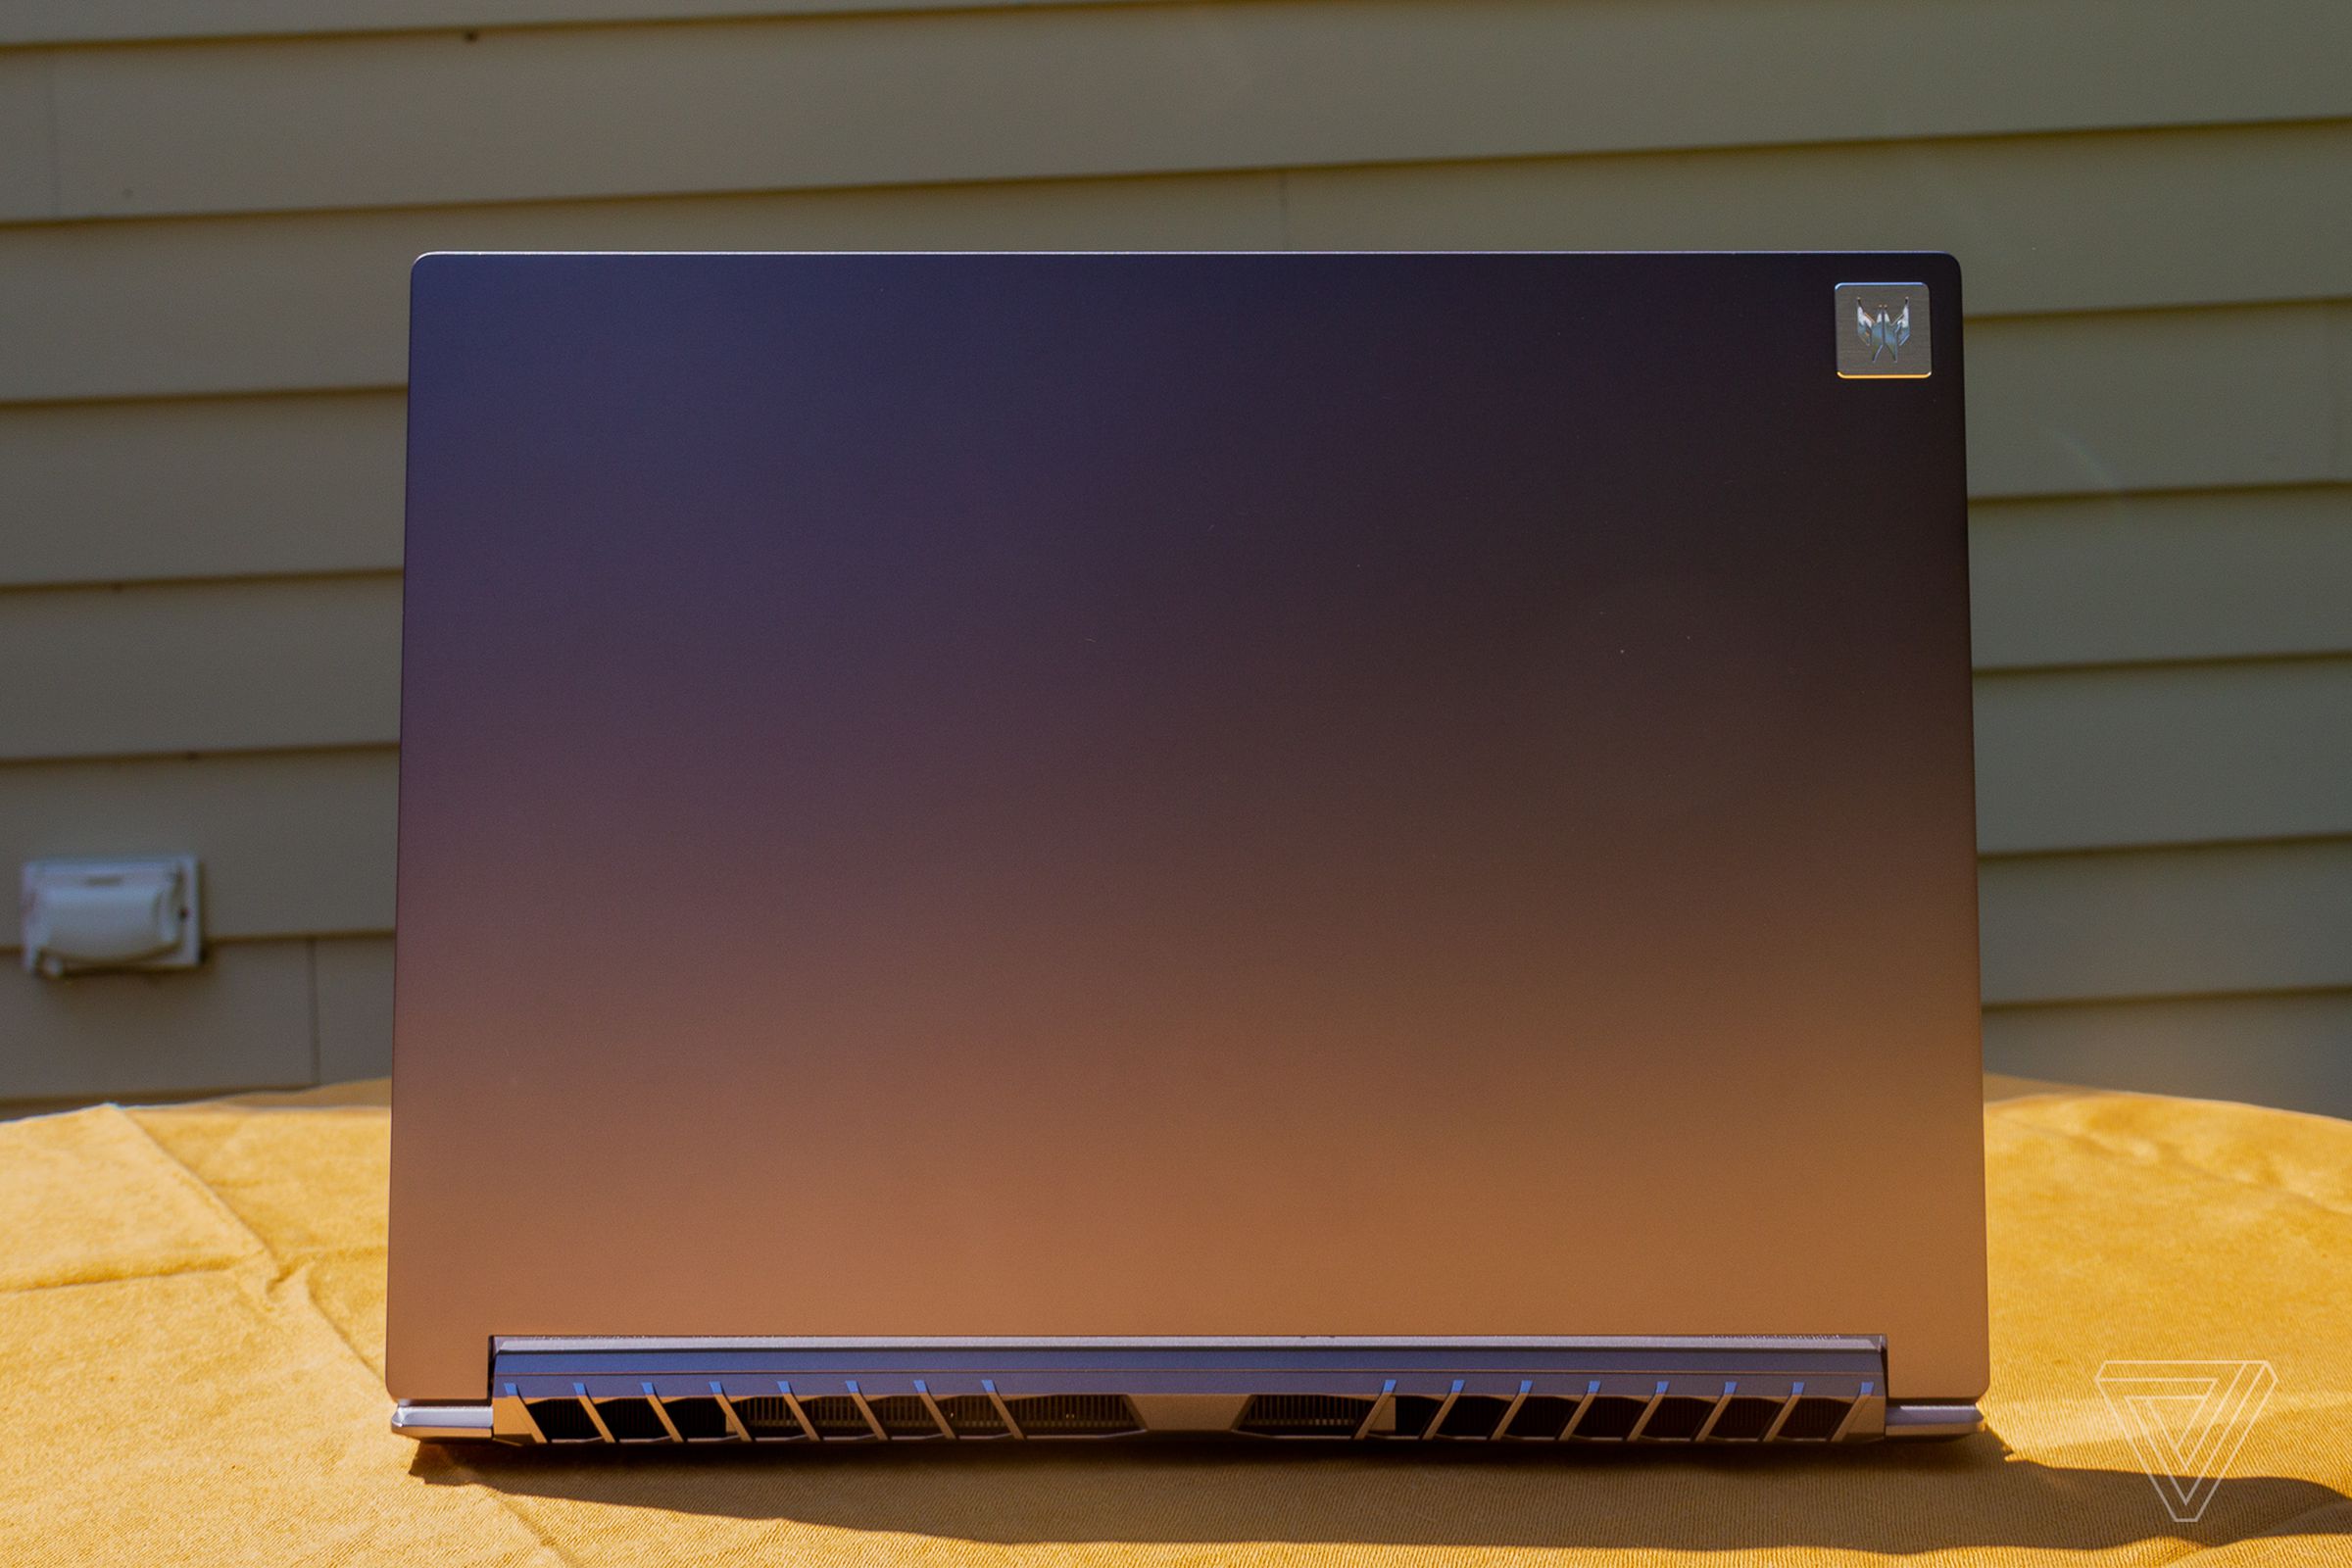 The Acer Predator Triton 500 SE open seen from the back on a yellow tablecloth.